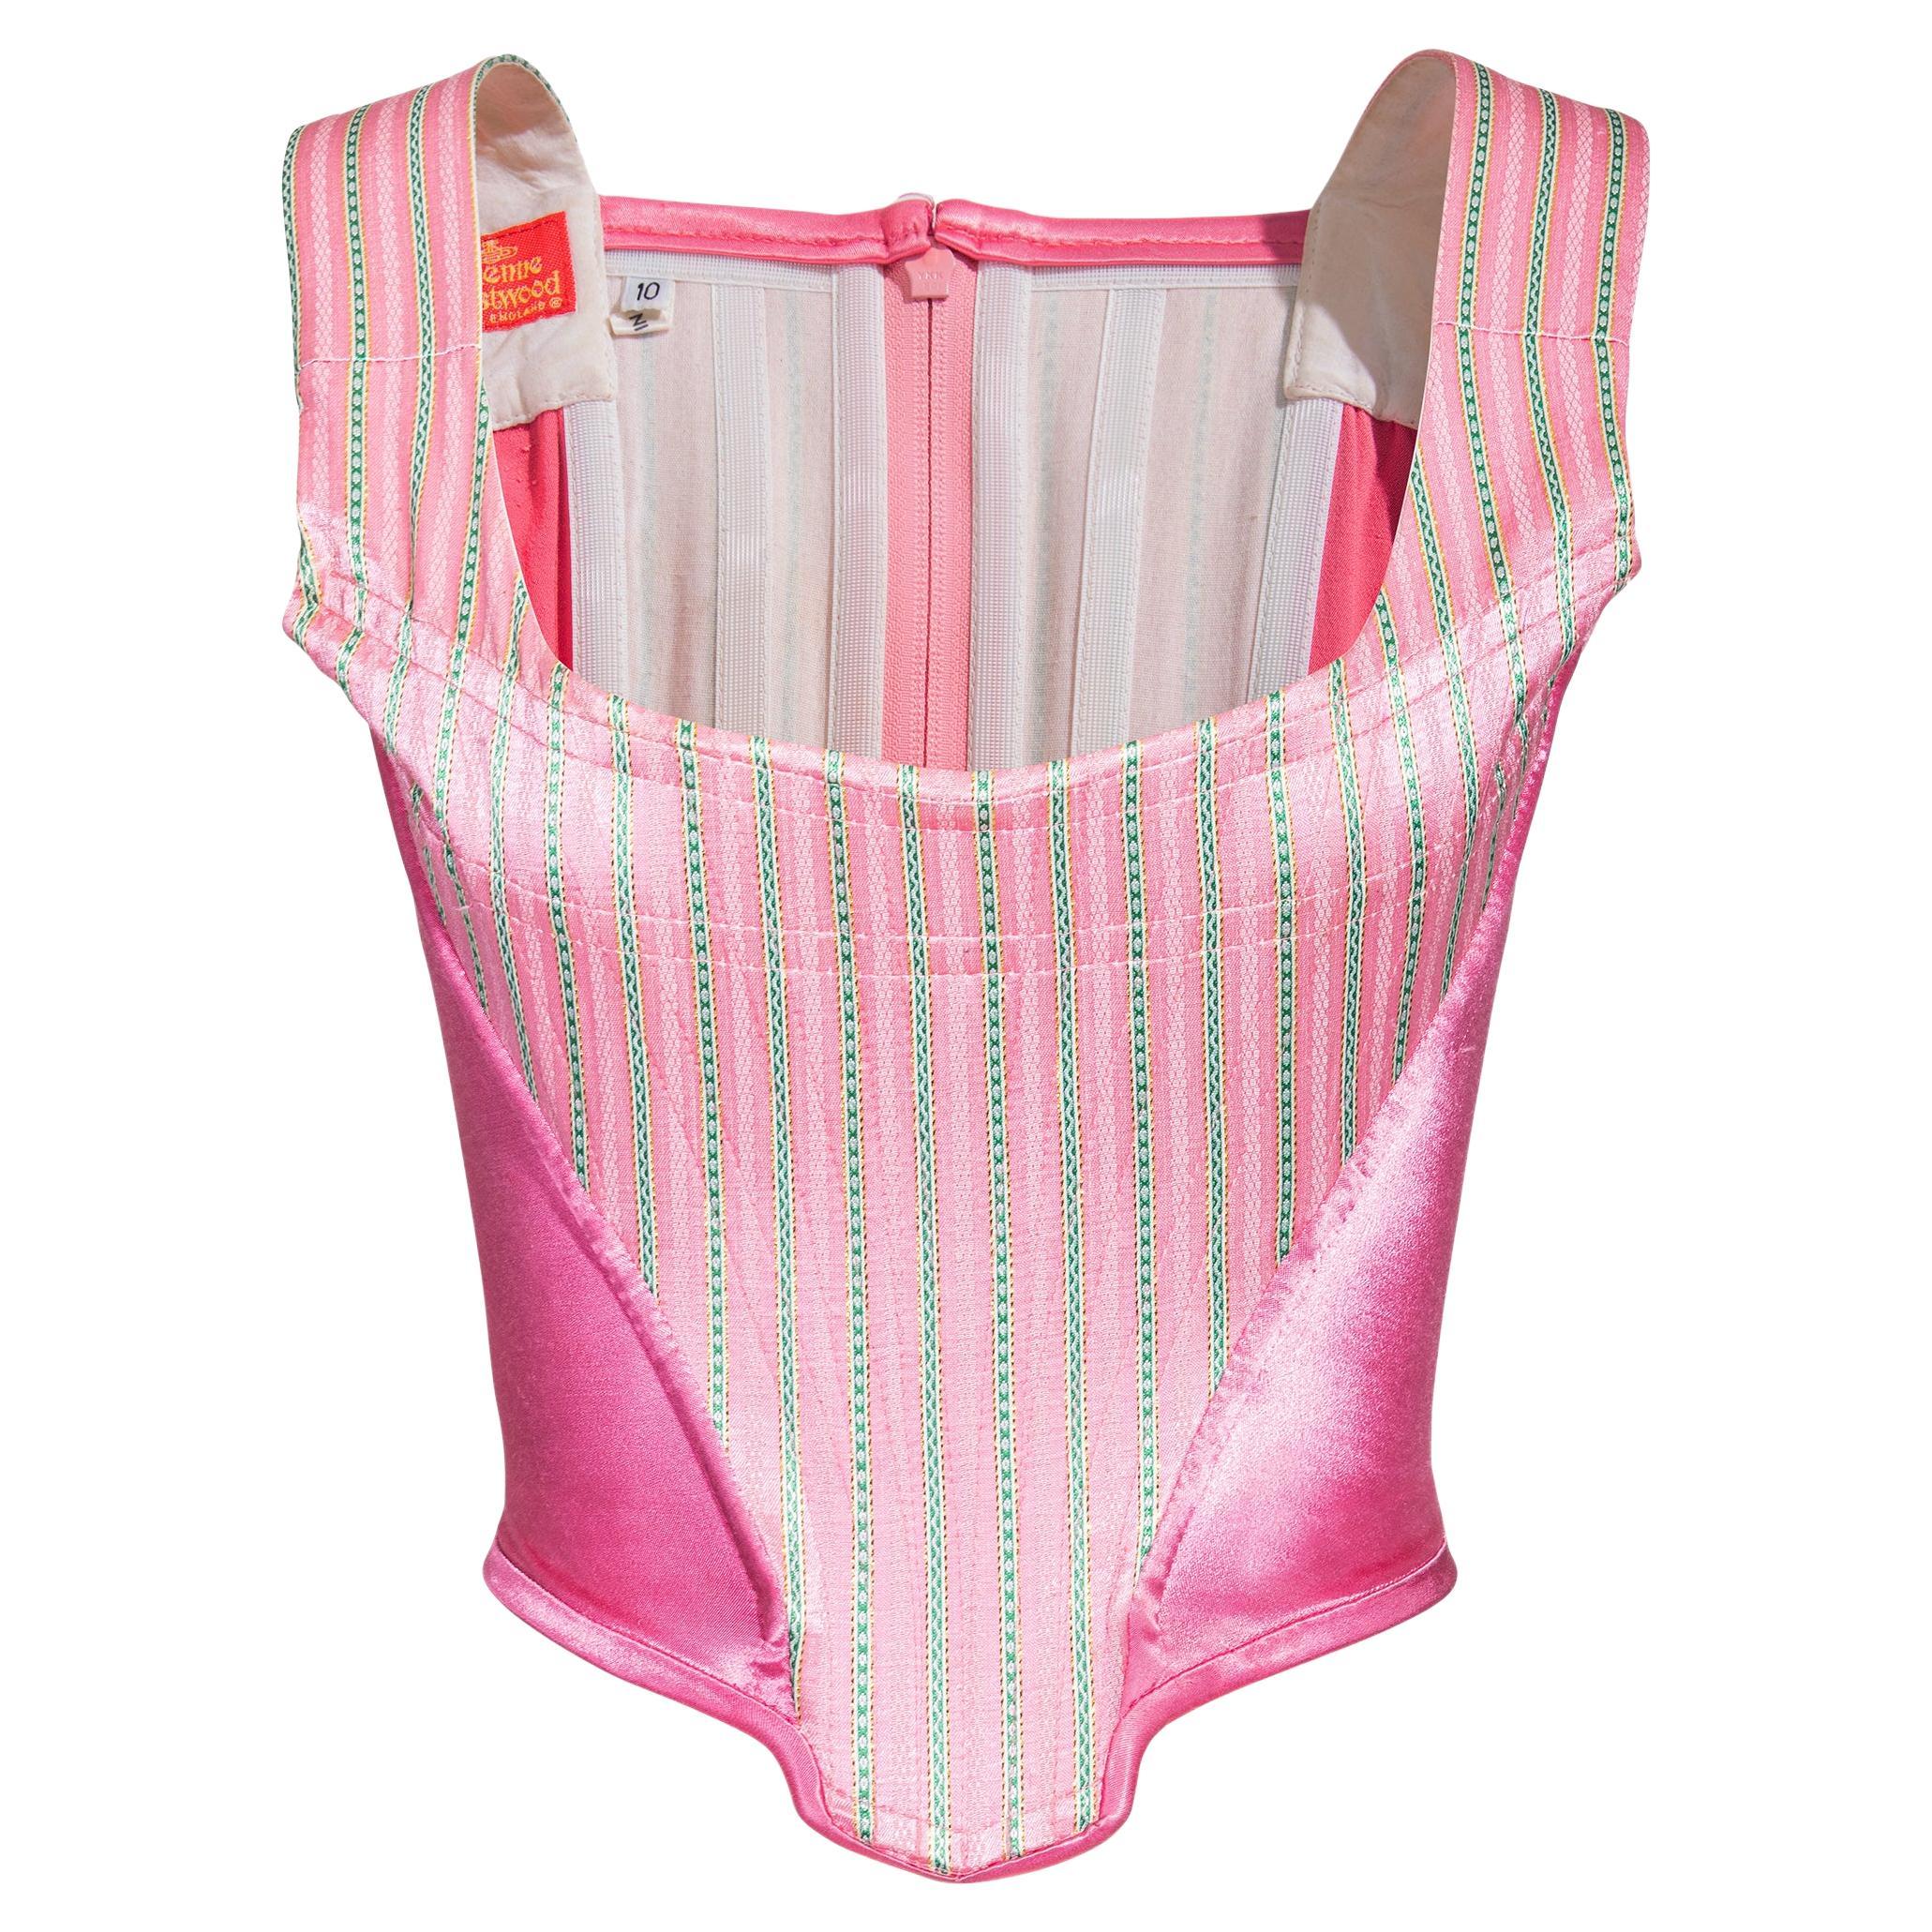 A/W 1991 Vivienne Westwood 'Dressing Up' Pink and Green Striped Corset For Sale